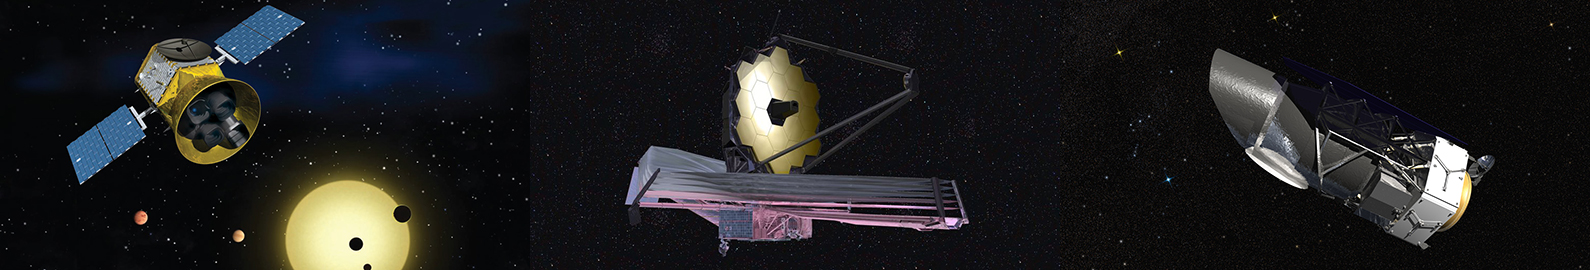 Artists' renderings of future space telescopes that will search for exoplanets: TESS, the James Webb Space Telescope, and WFIRST.